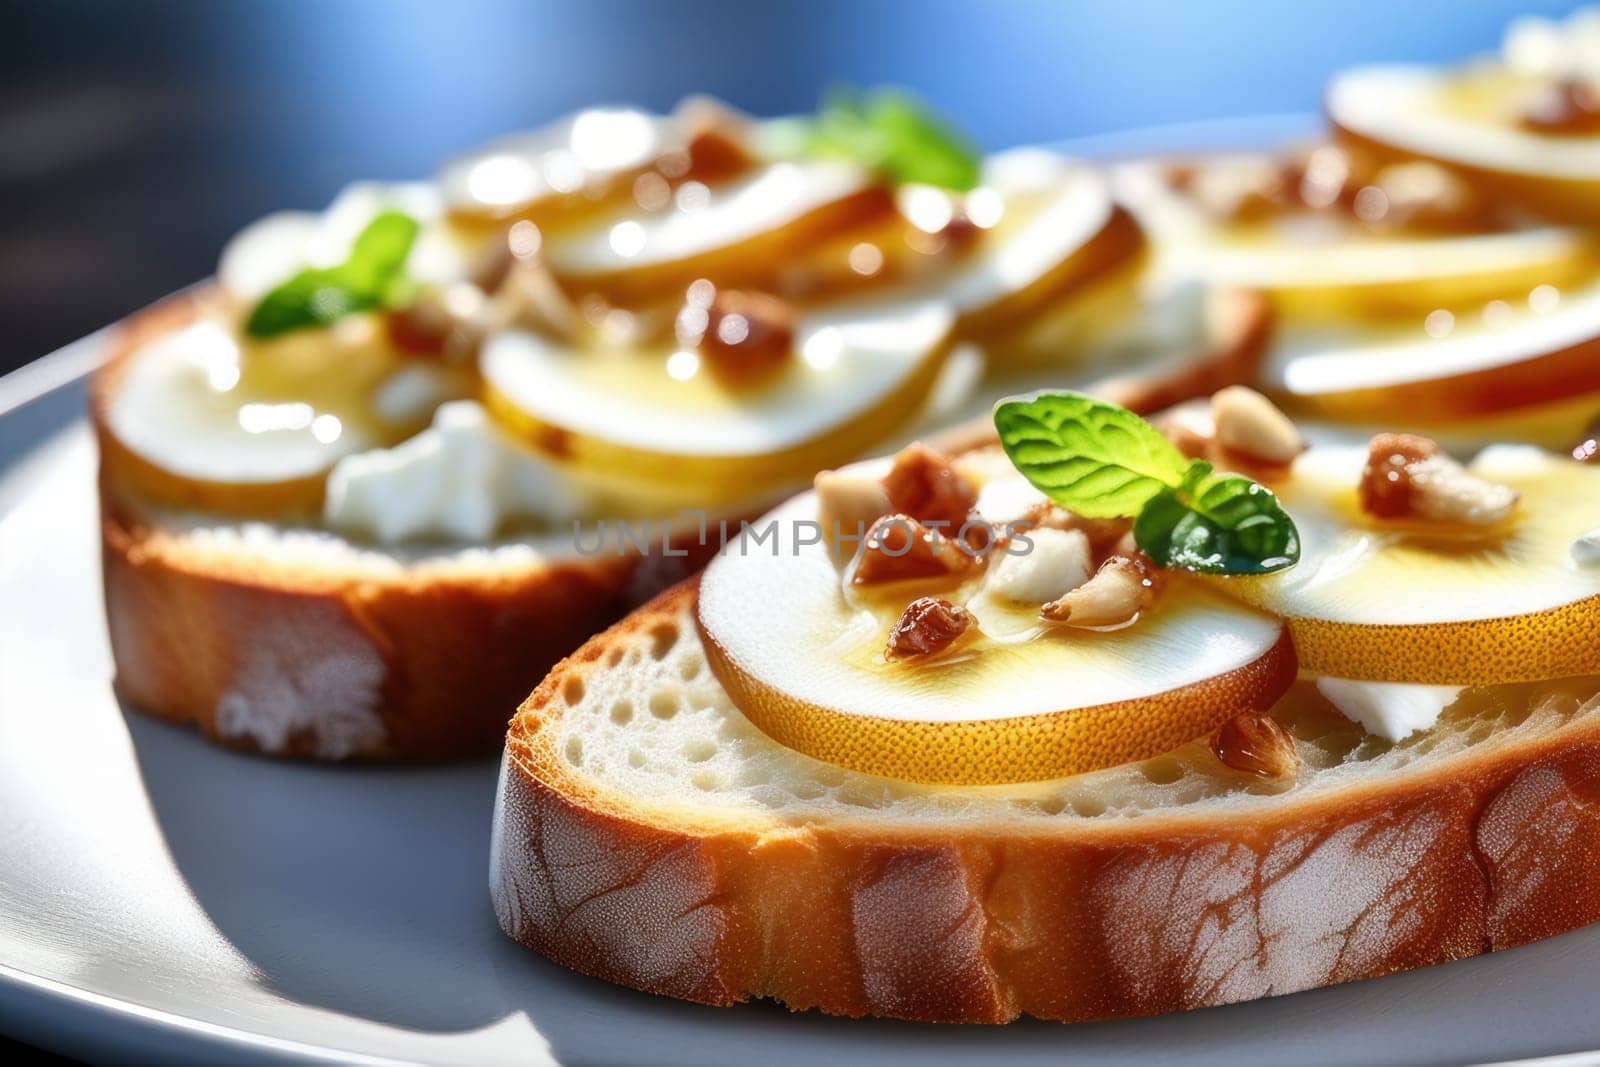 Bruschetta with caramelized pears and cheese, delicious crostini for gourmet breakfast, brunch or lunch, close up